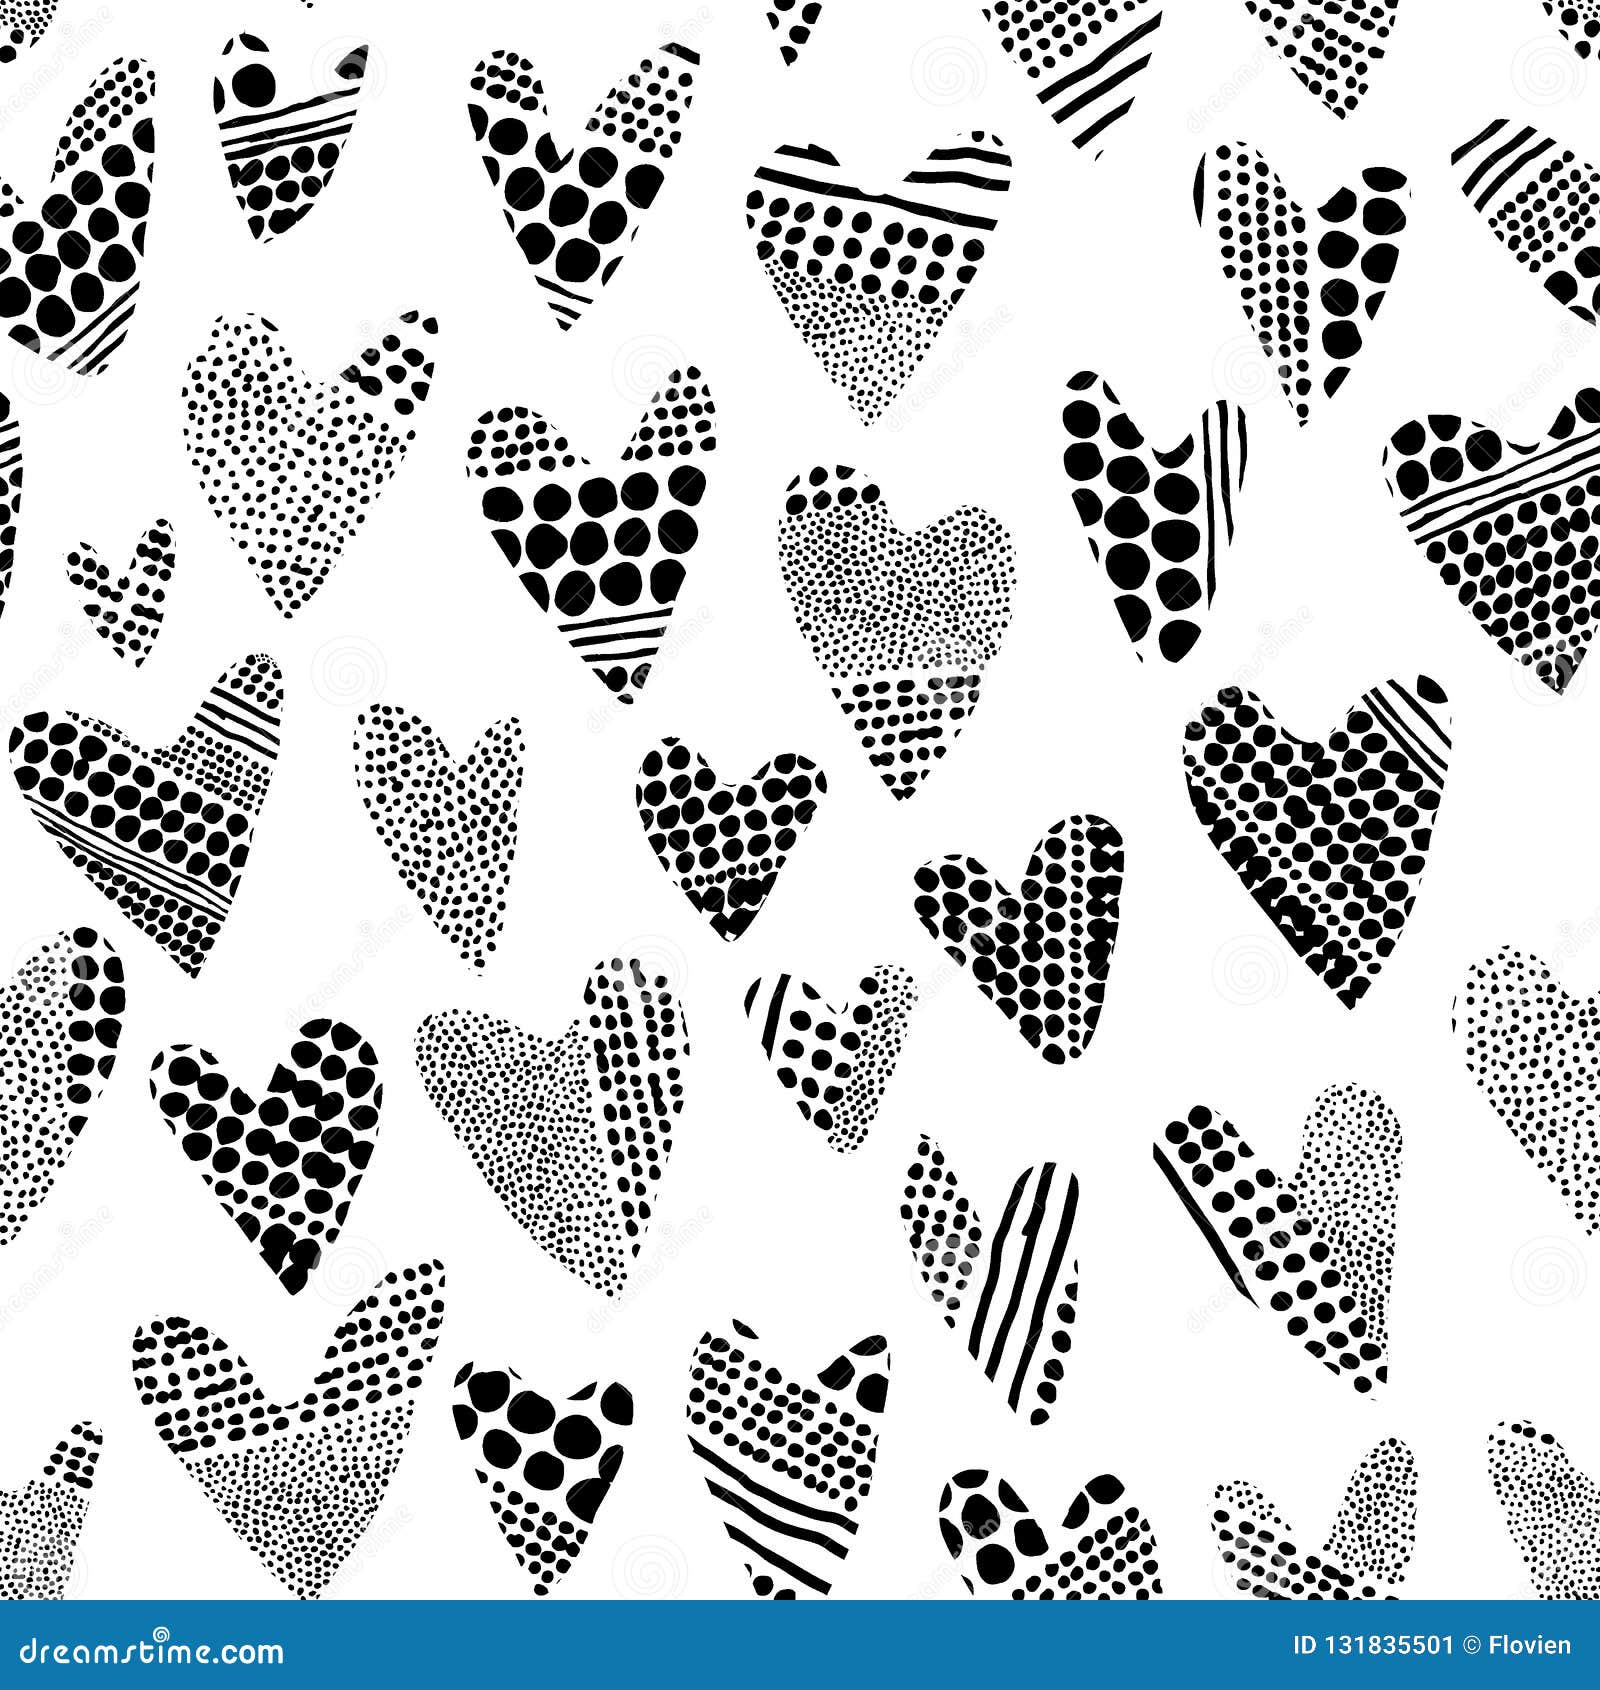 New cute patterns black and white Valentine S Day Seamless Pattern Cute Black And White Print For Stock Vector Illustration Of Hand Abstract 131835501